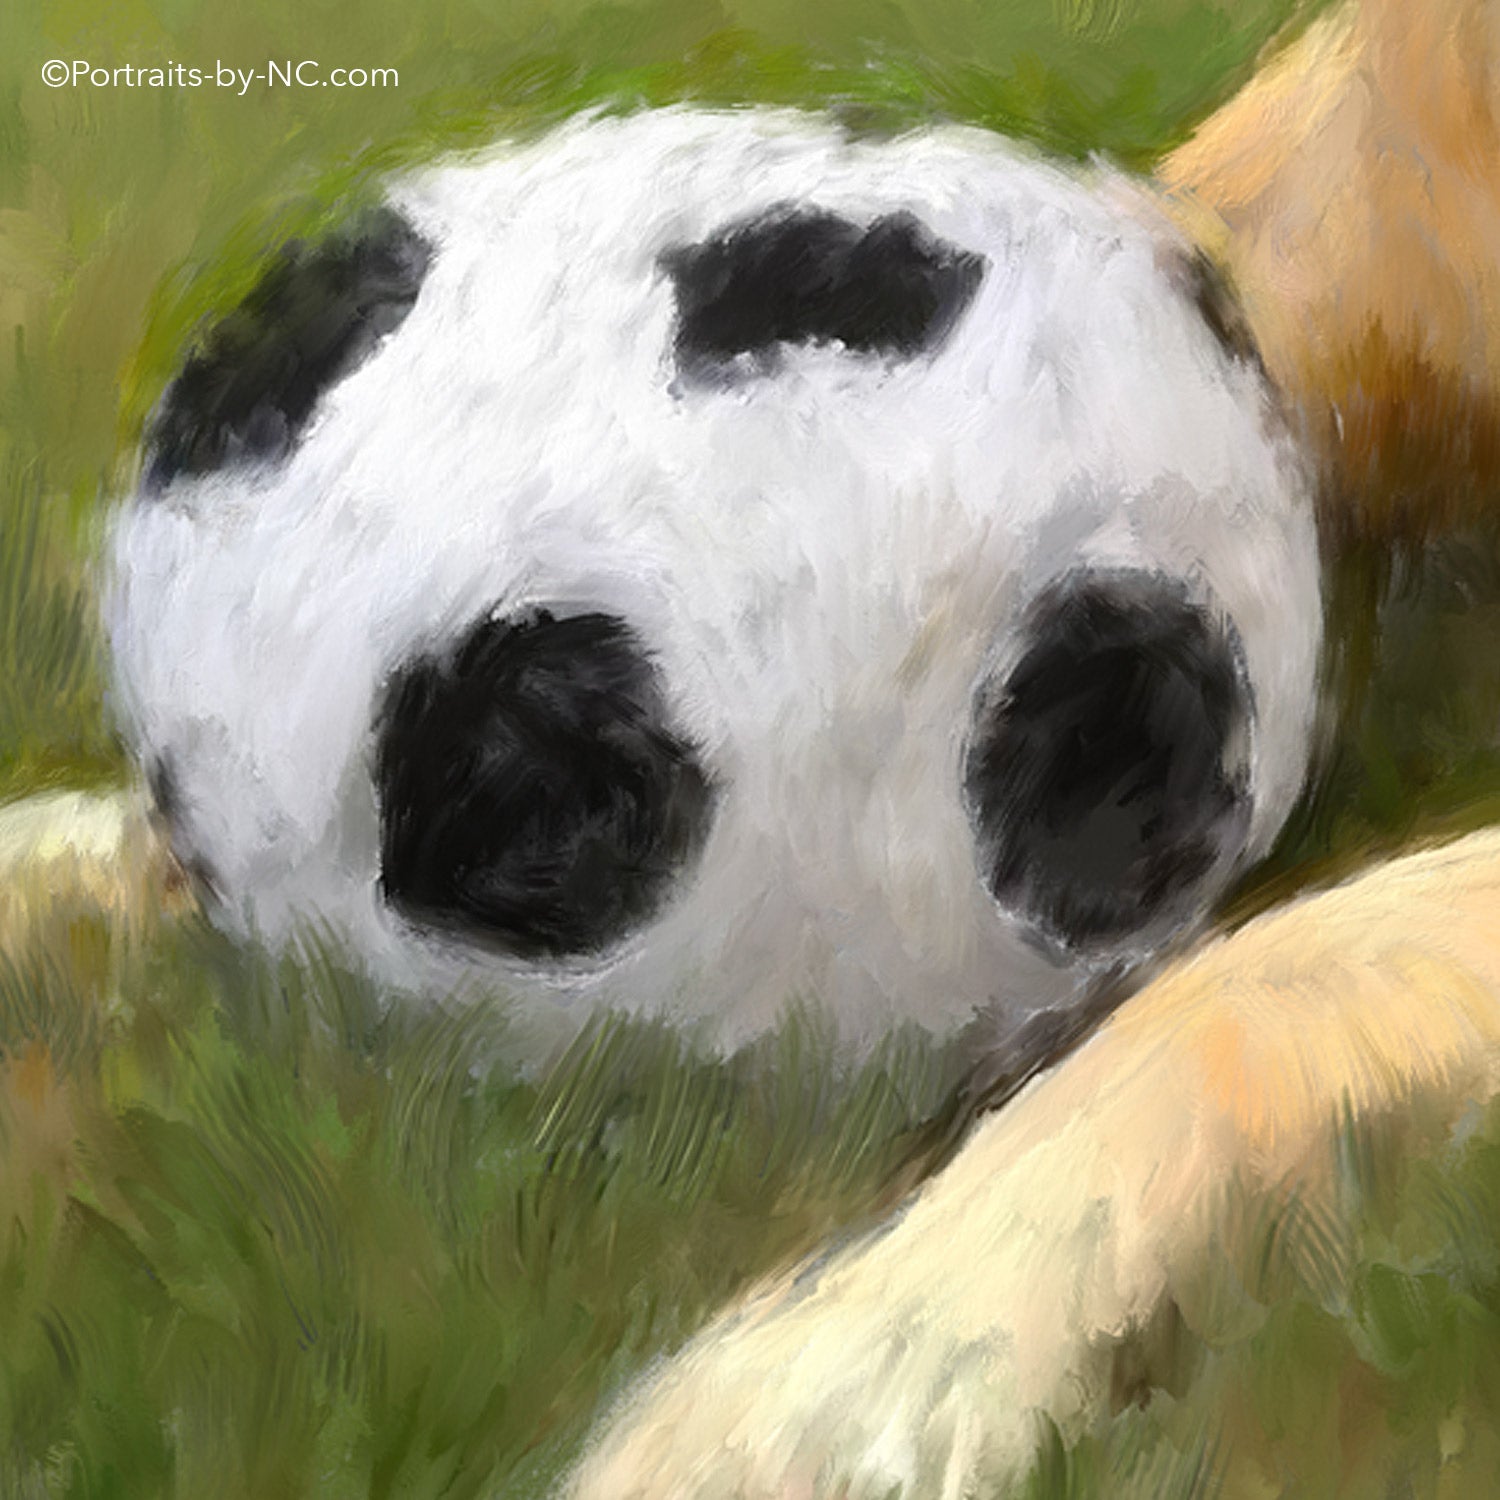 Toy Soccer ball